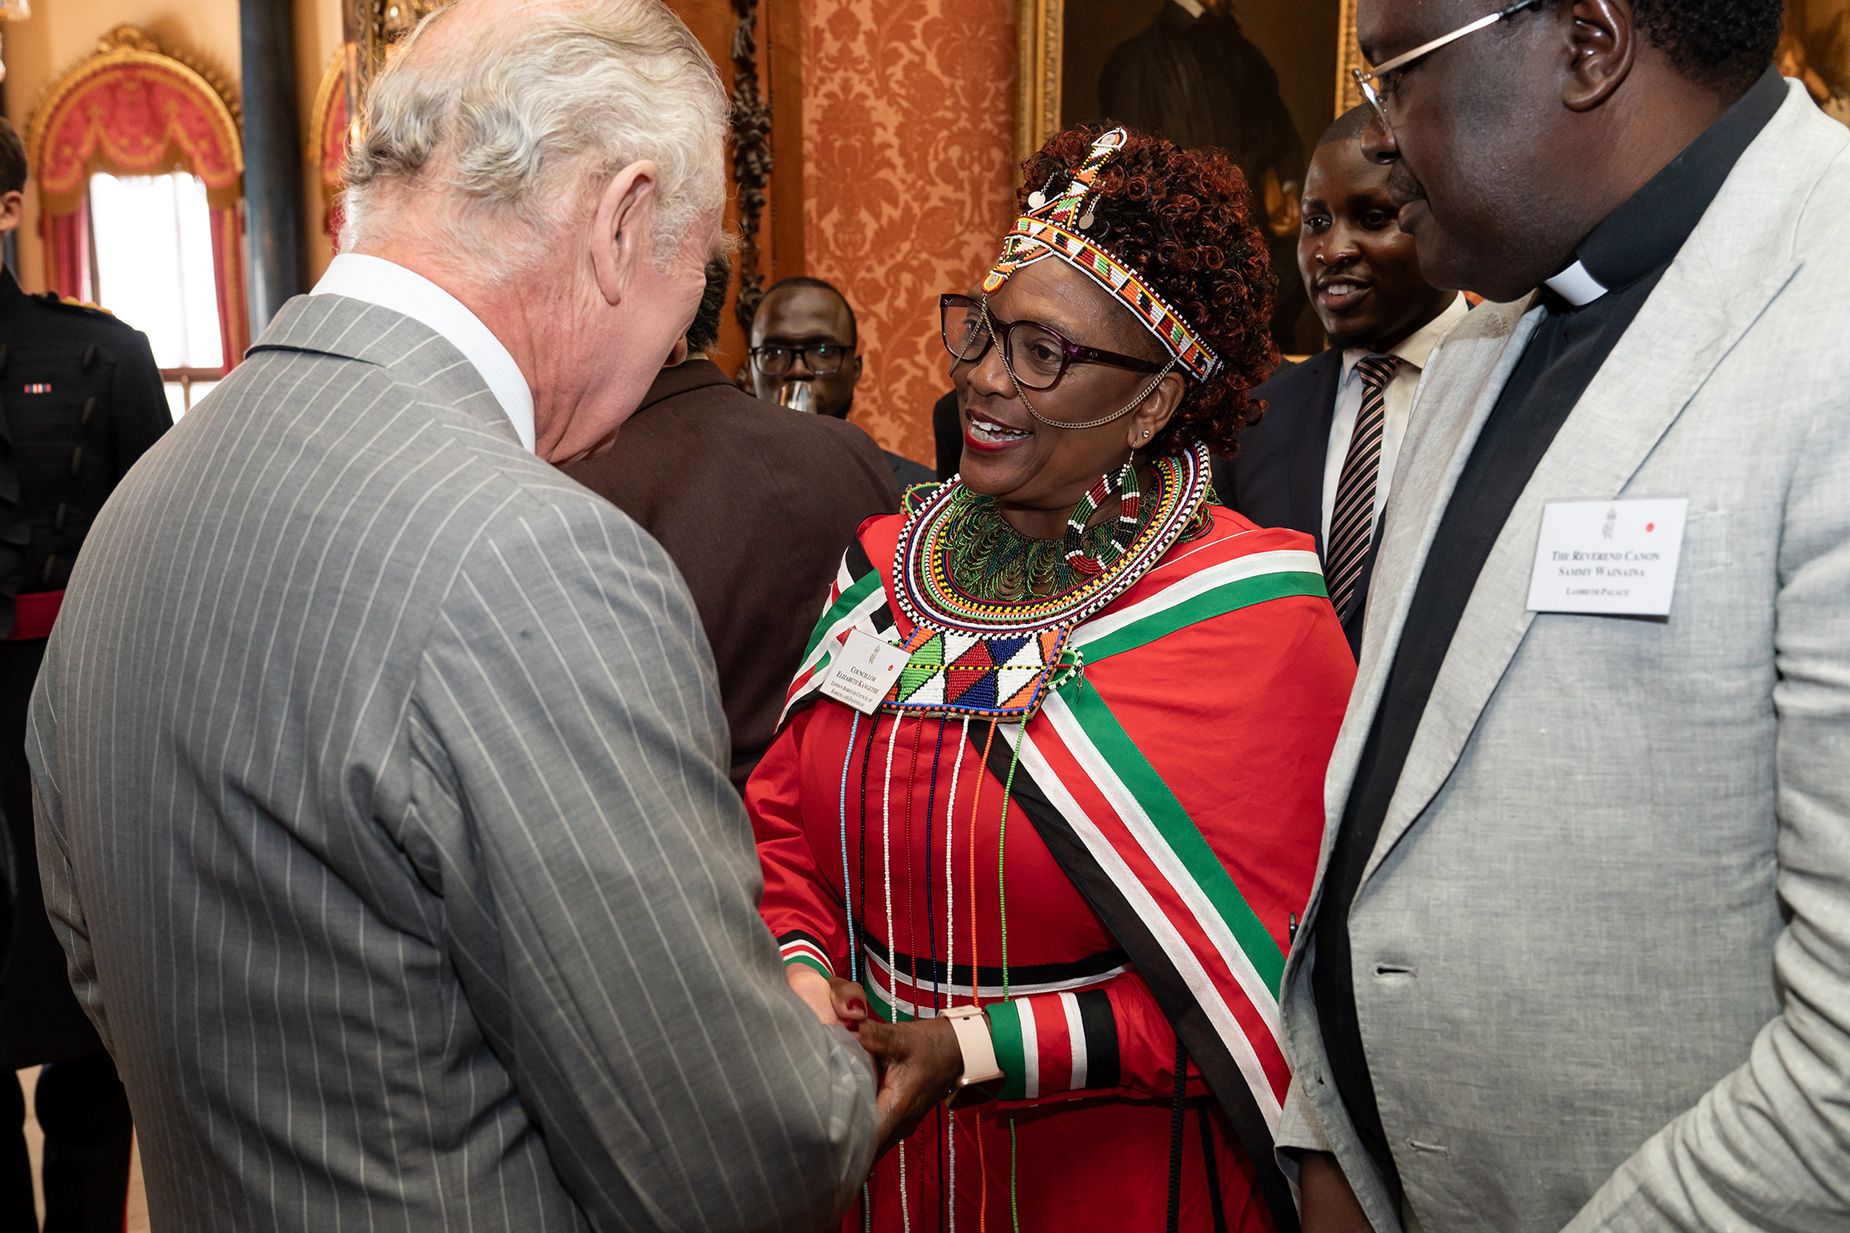 King Charles III will confront Britain's colonial past when he visits Kenya